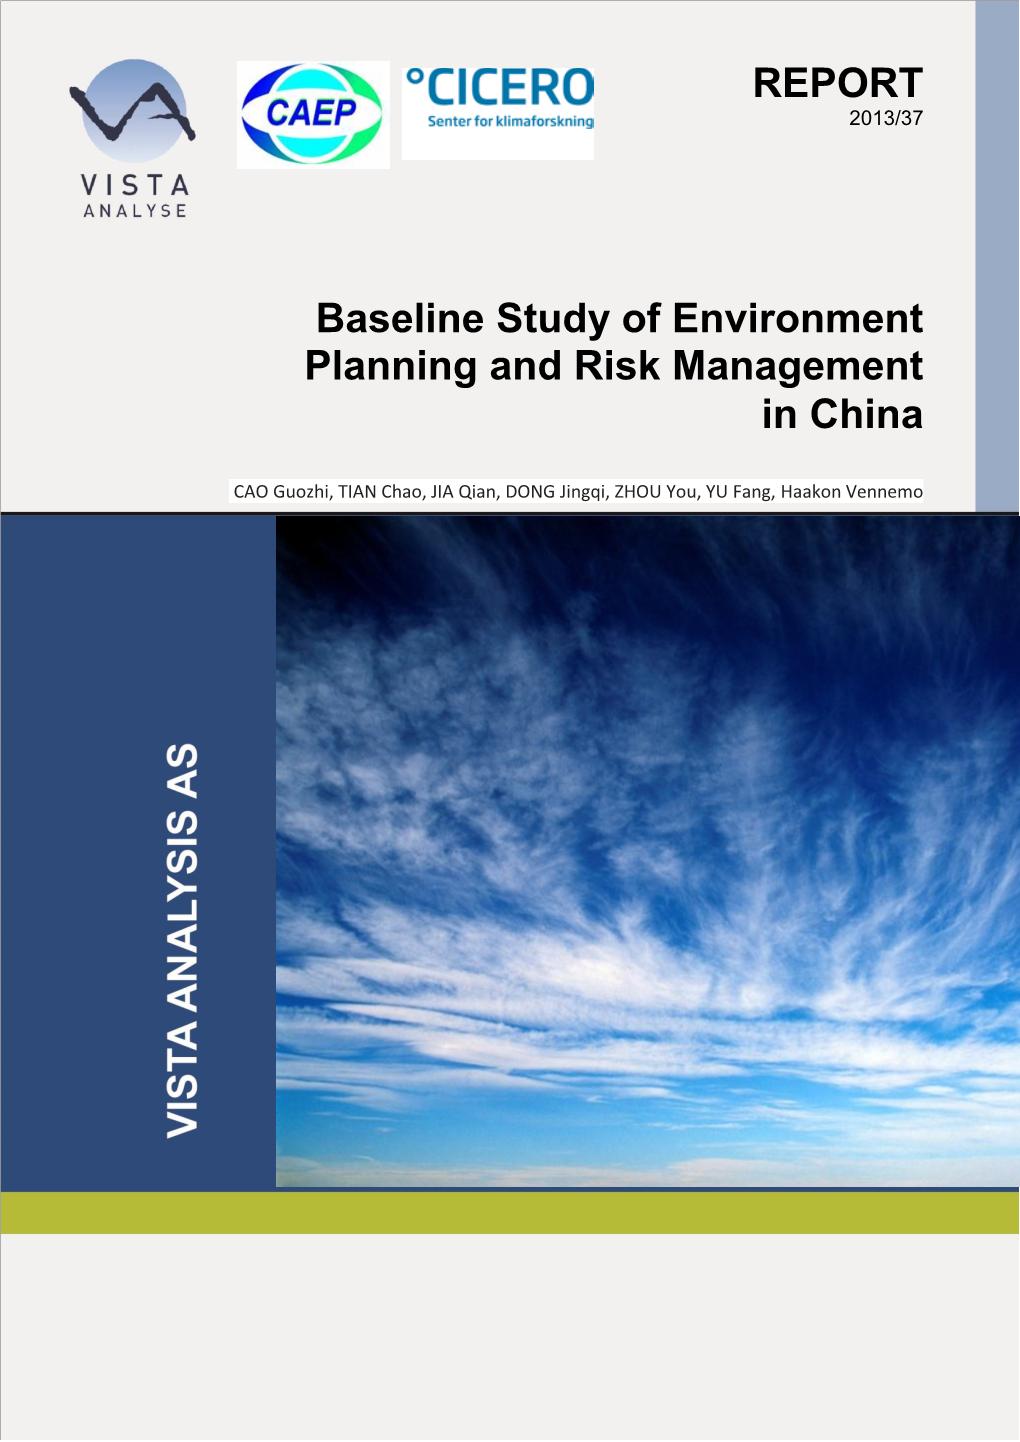 REPORT Baseline Study of Environment Planning and Risk